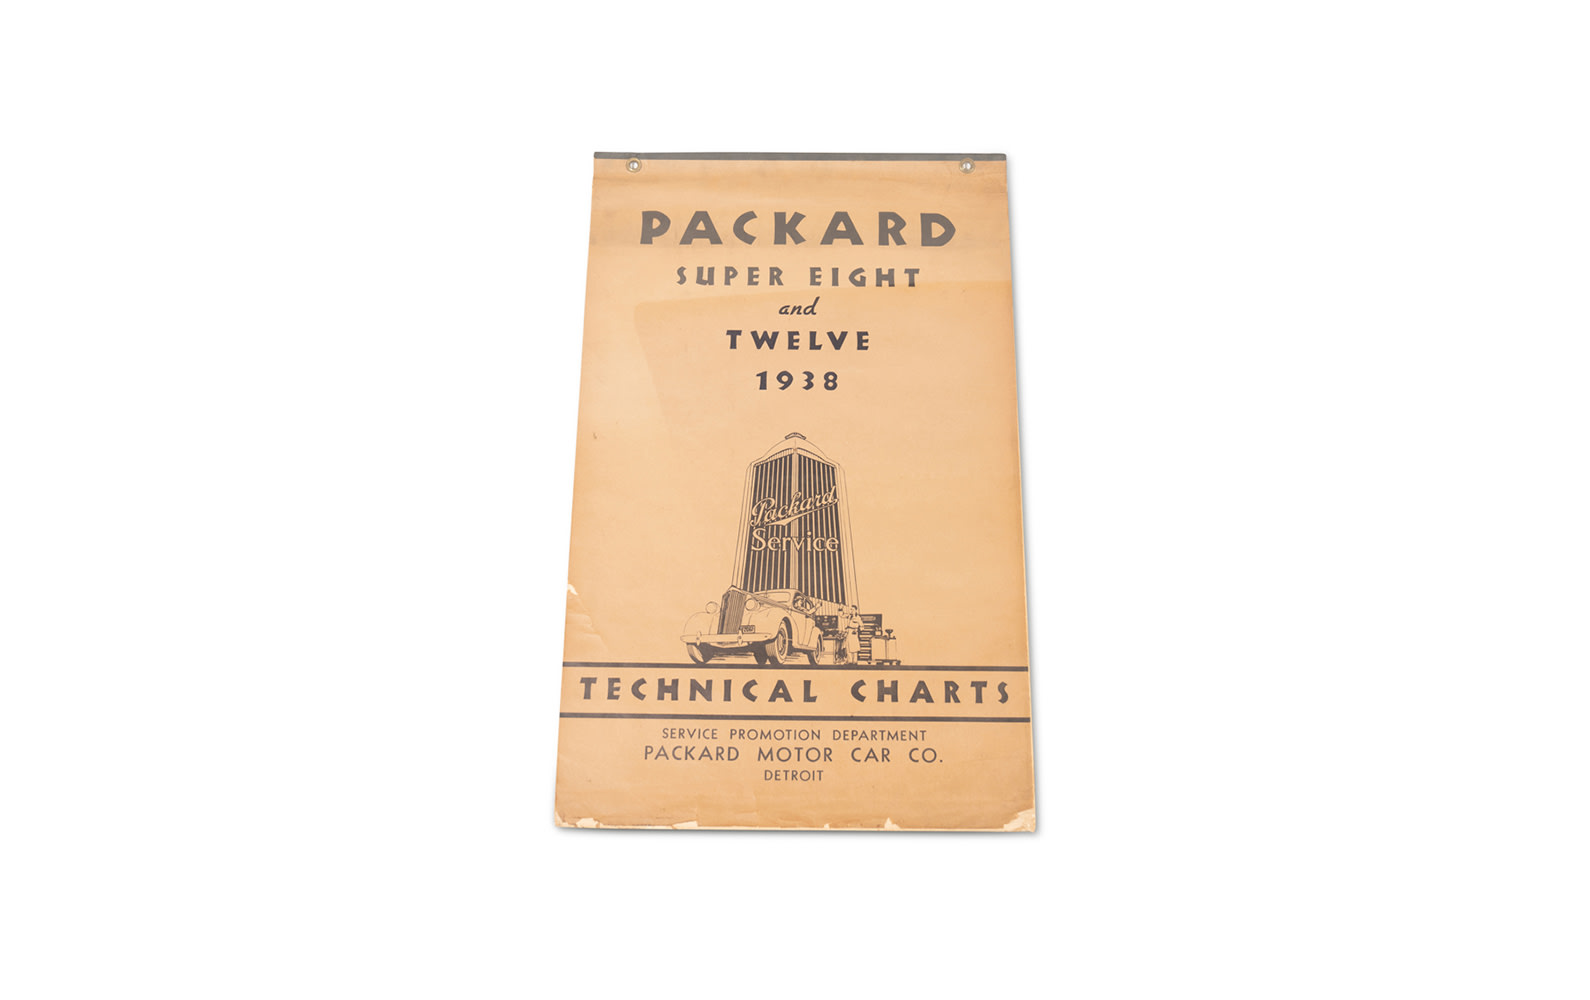 Packard Super Eight and Twelve Technical Charts, 1938